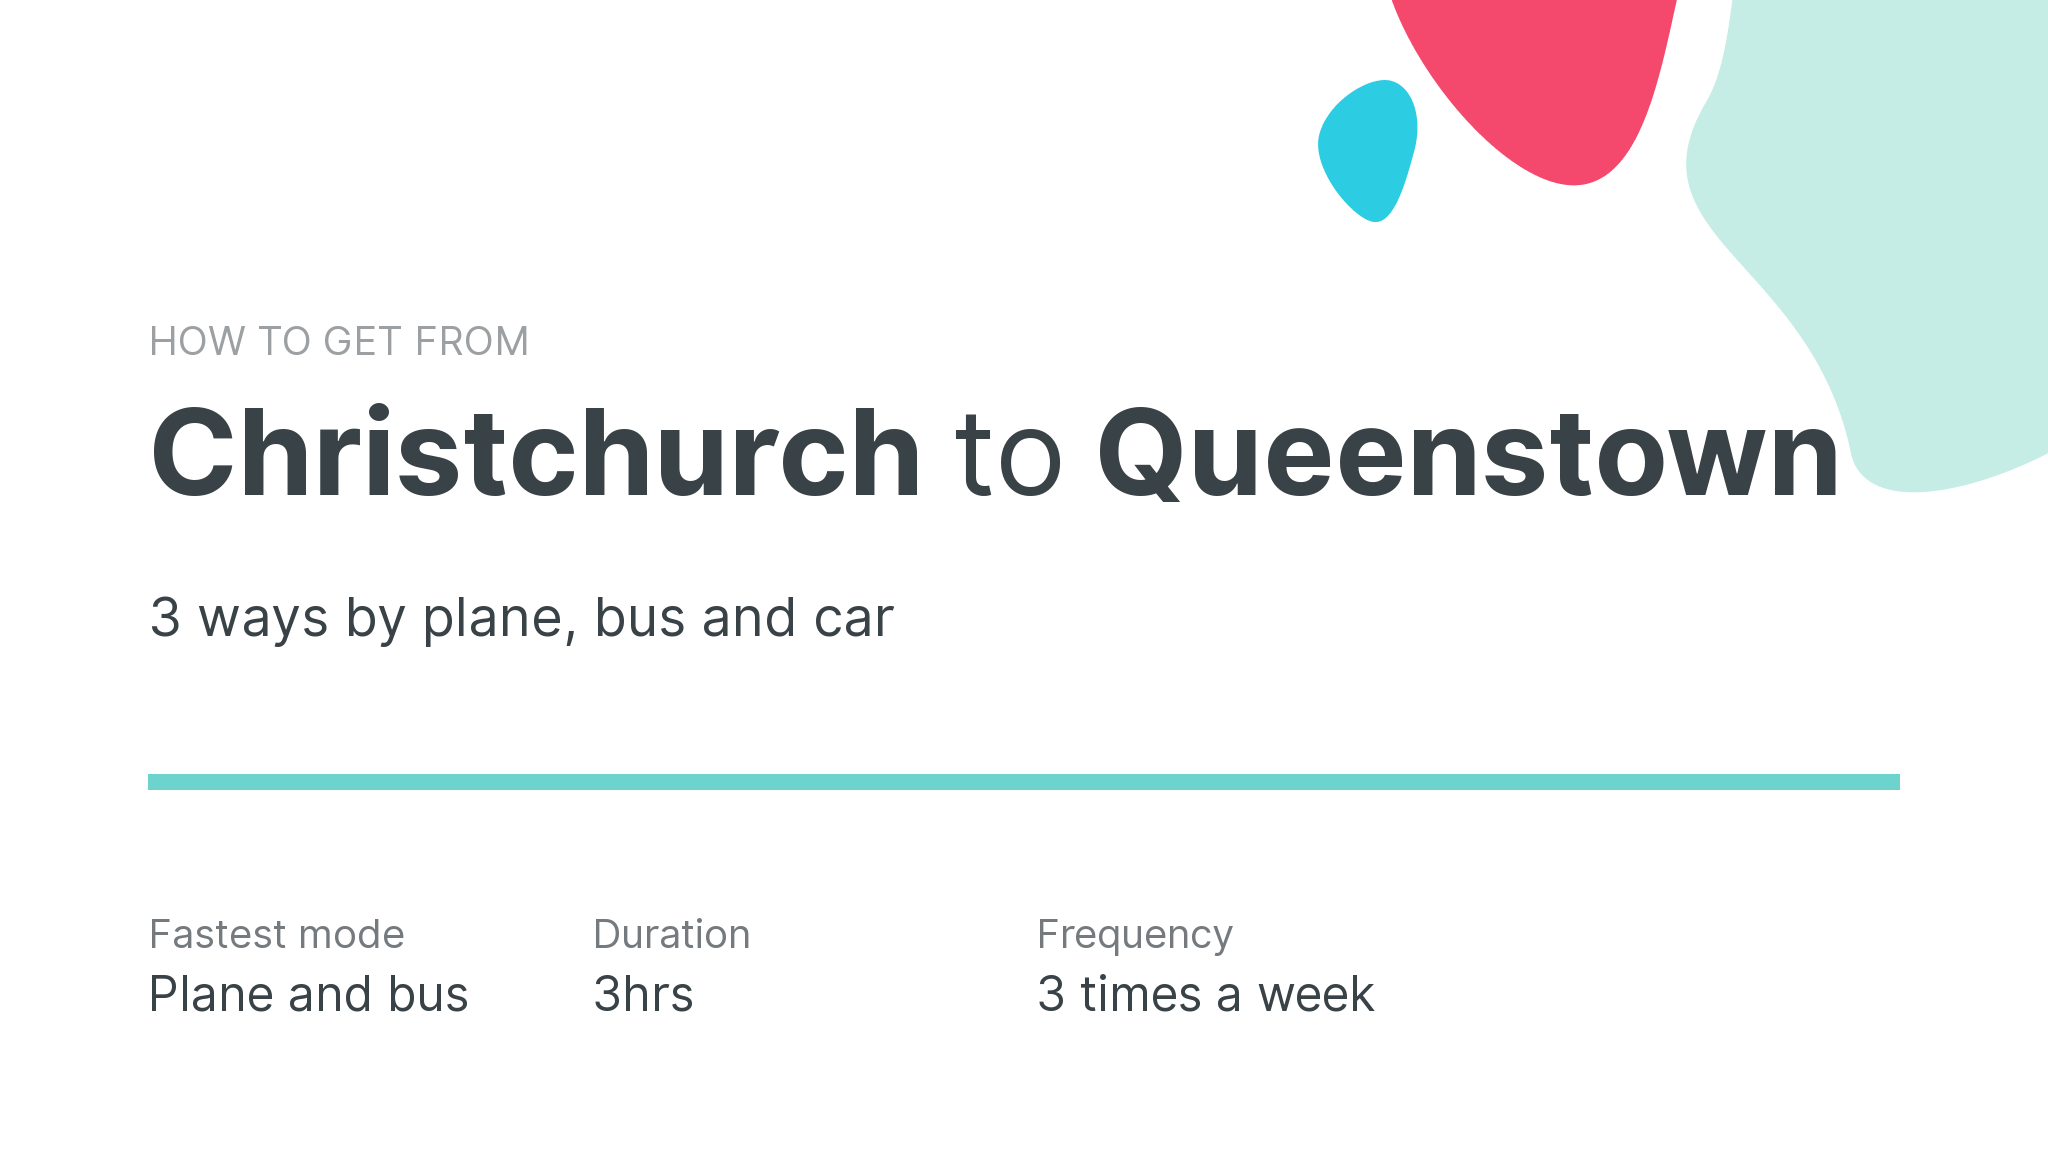 How do I get from Christchurch to Queenstown